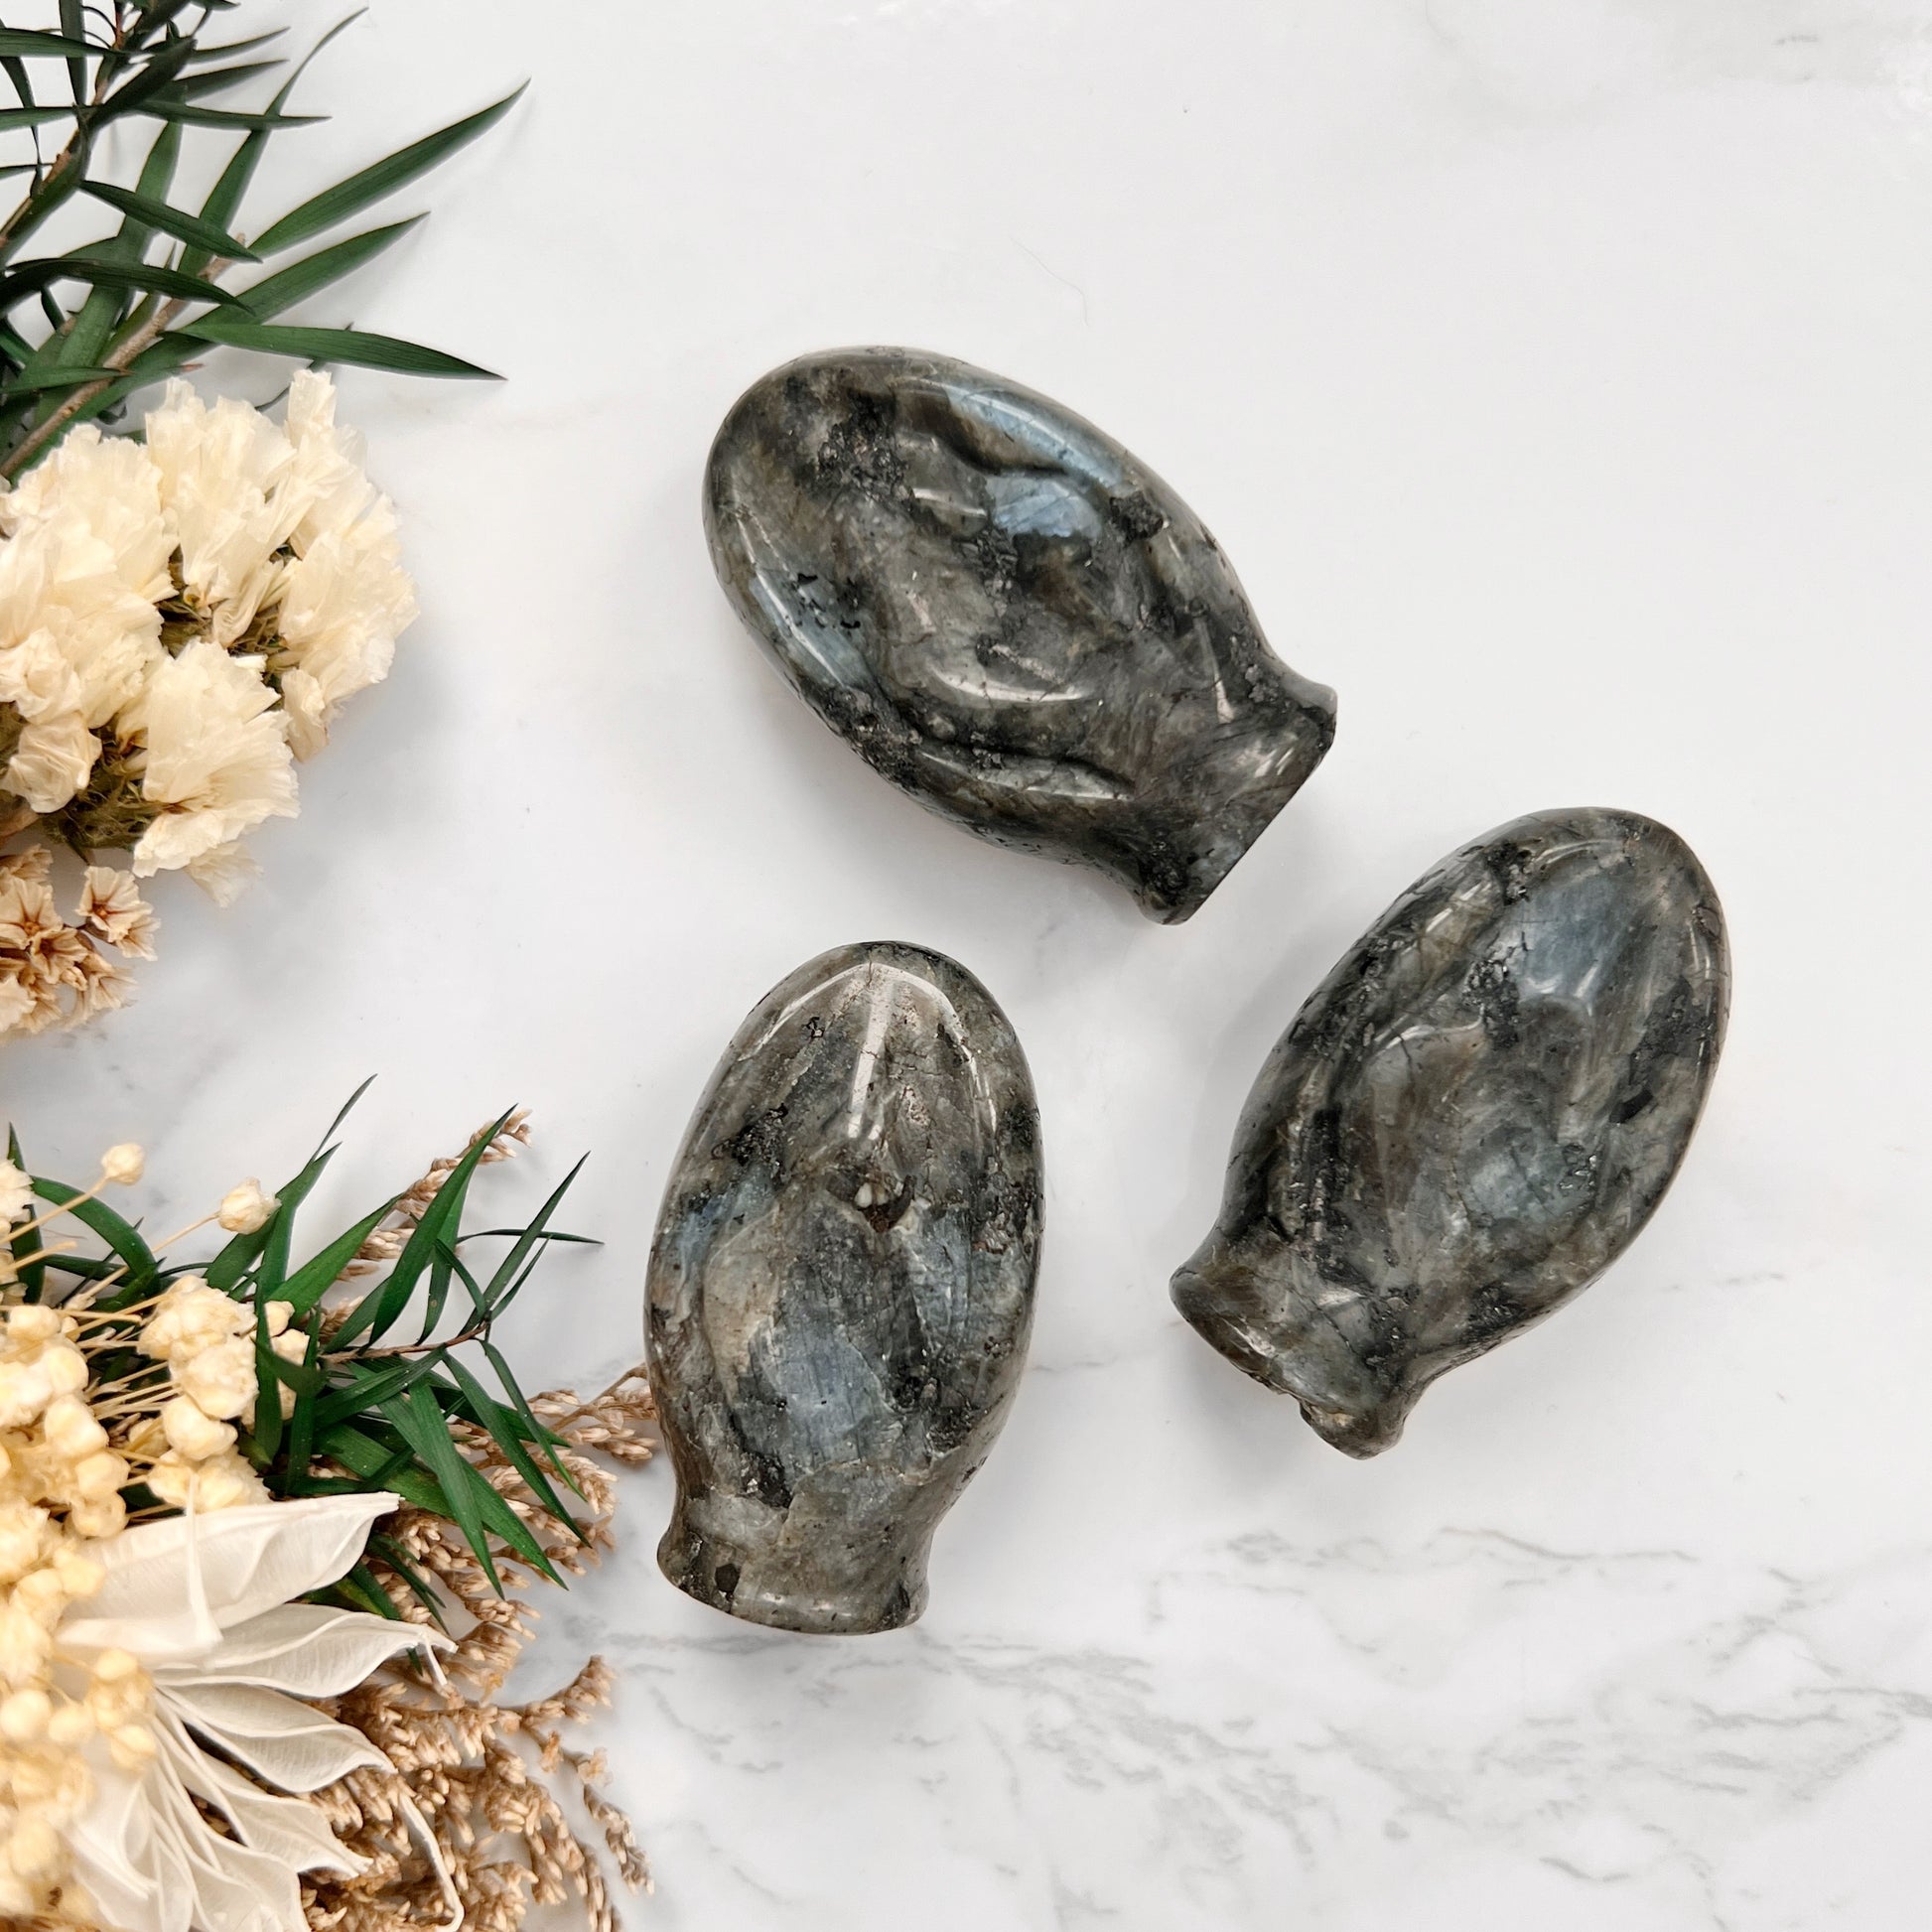 Triple Grounding Force: A striking display of three Larvikite crystal vulva shapes, each embodying the protective and grounding energy of this gemstone. The deep, earthy hues of Larvikite symbolize its connection to the Earth's stabilizing and grounding properties.